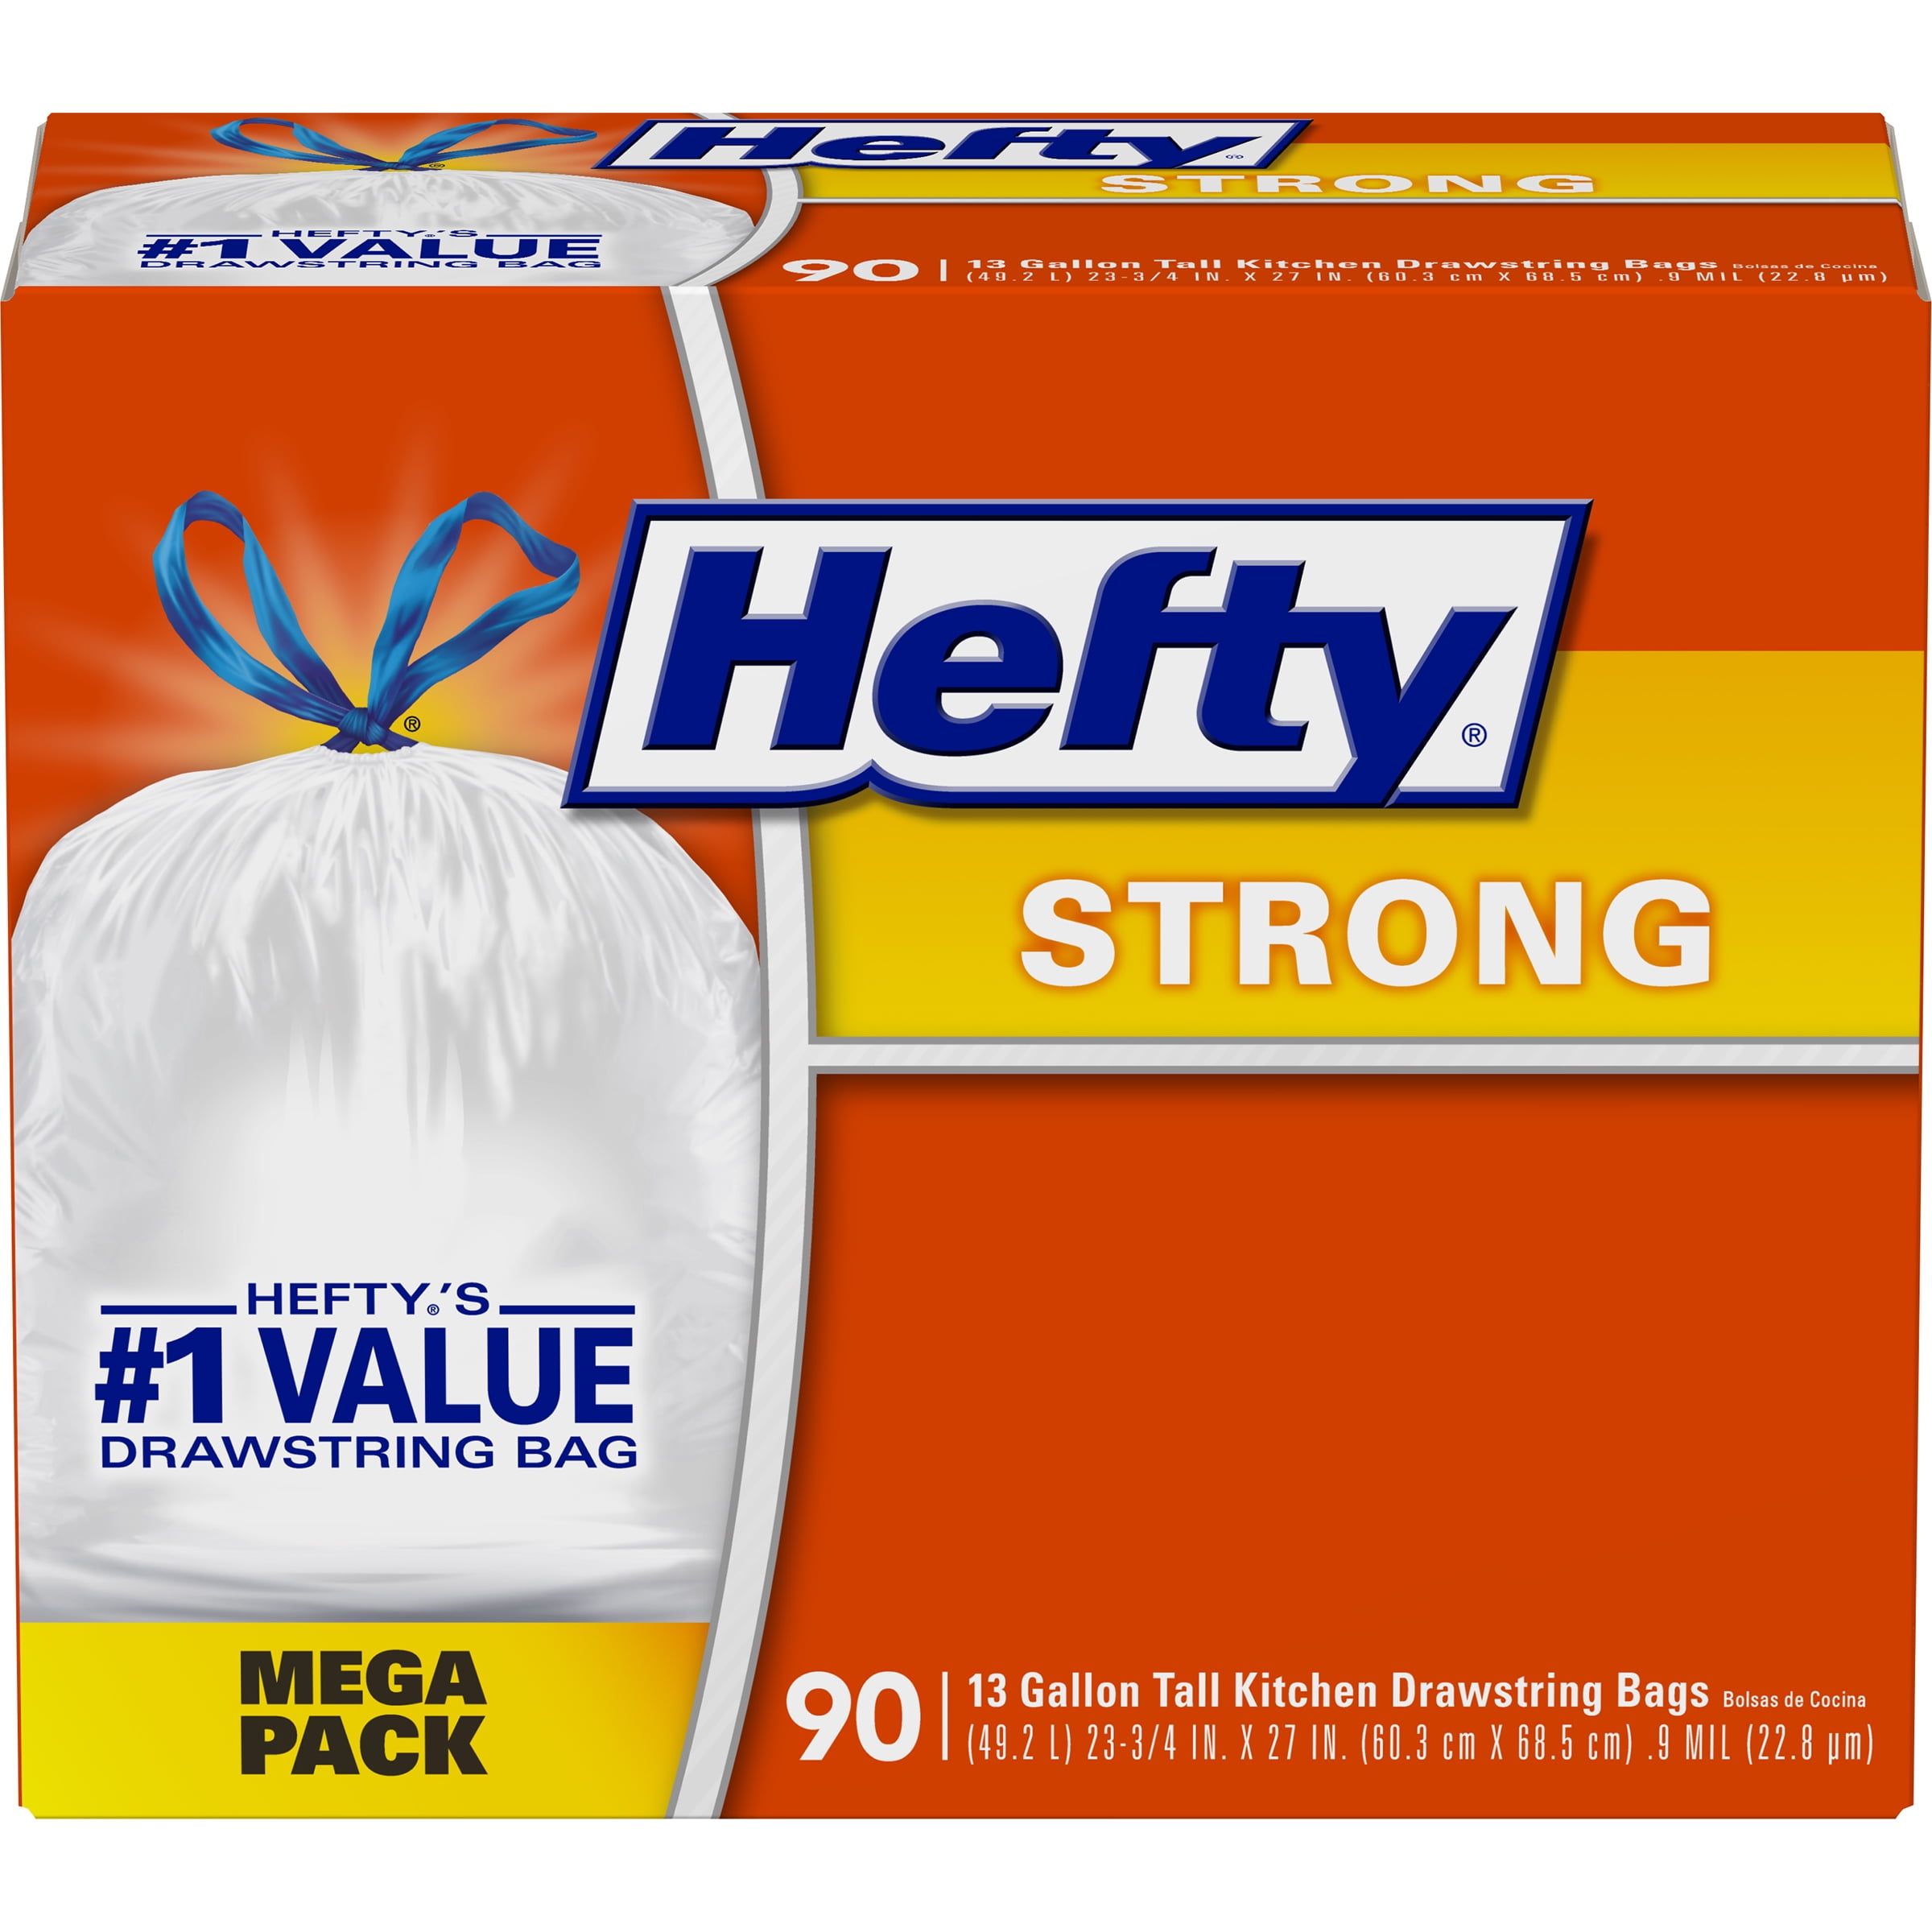 Hefty Recycling Trash Bags, Blue, 13 Gallon, 60 Count